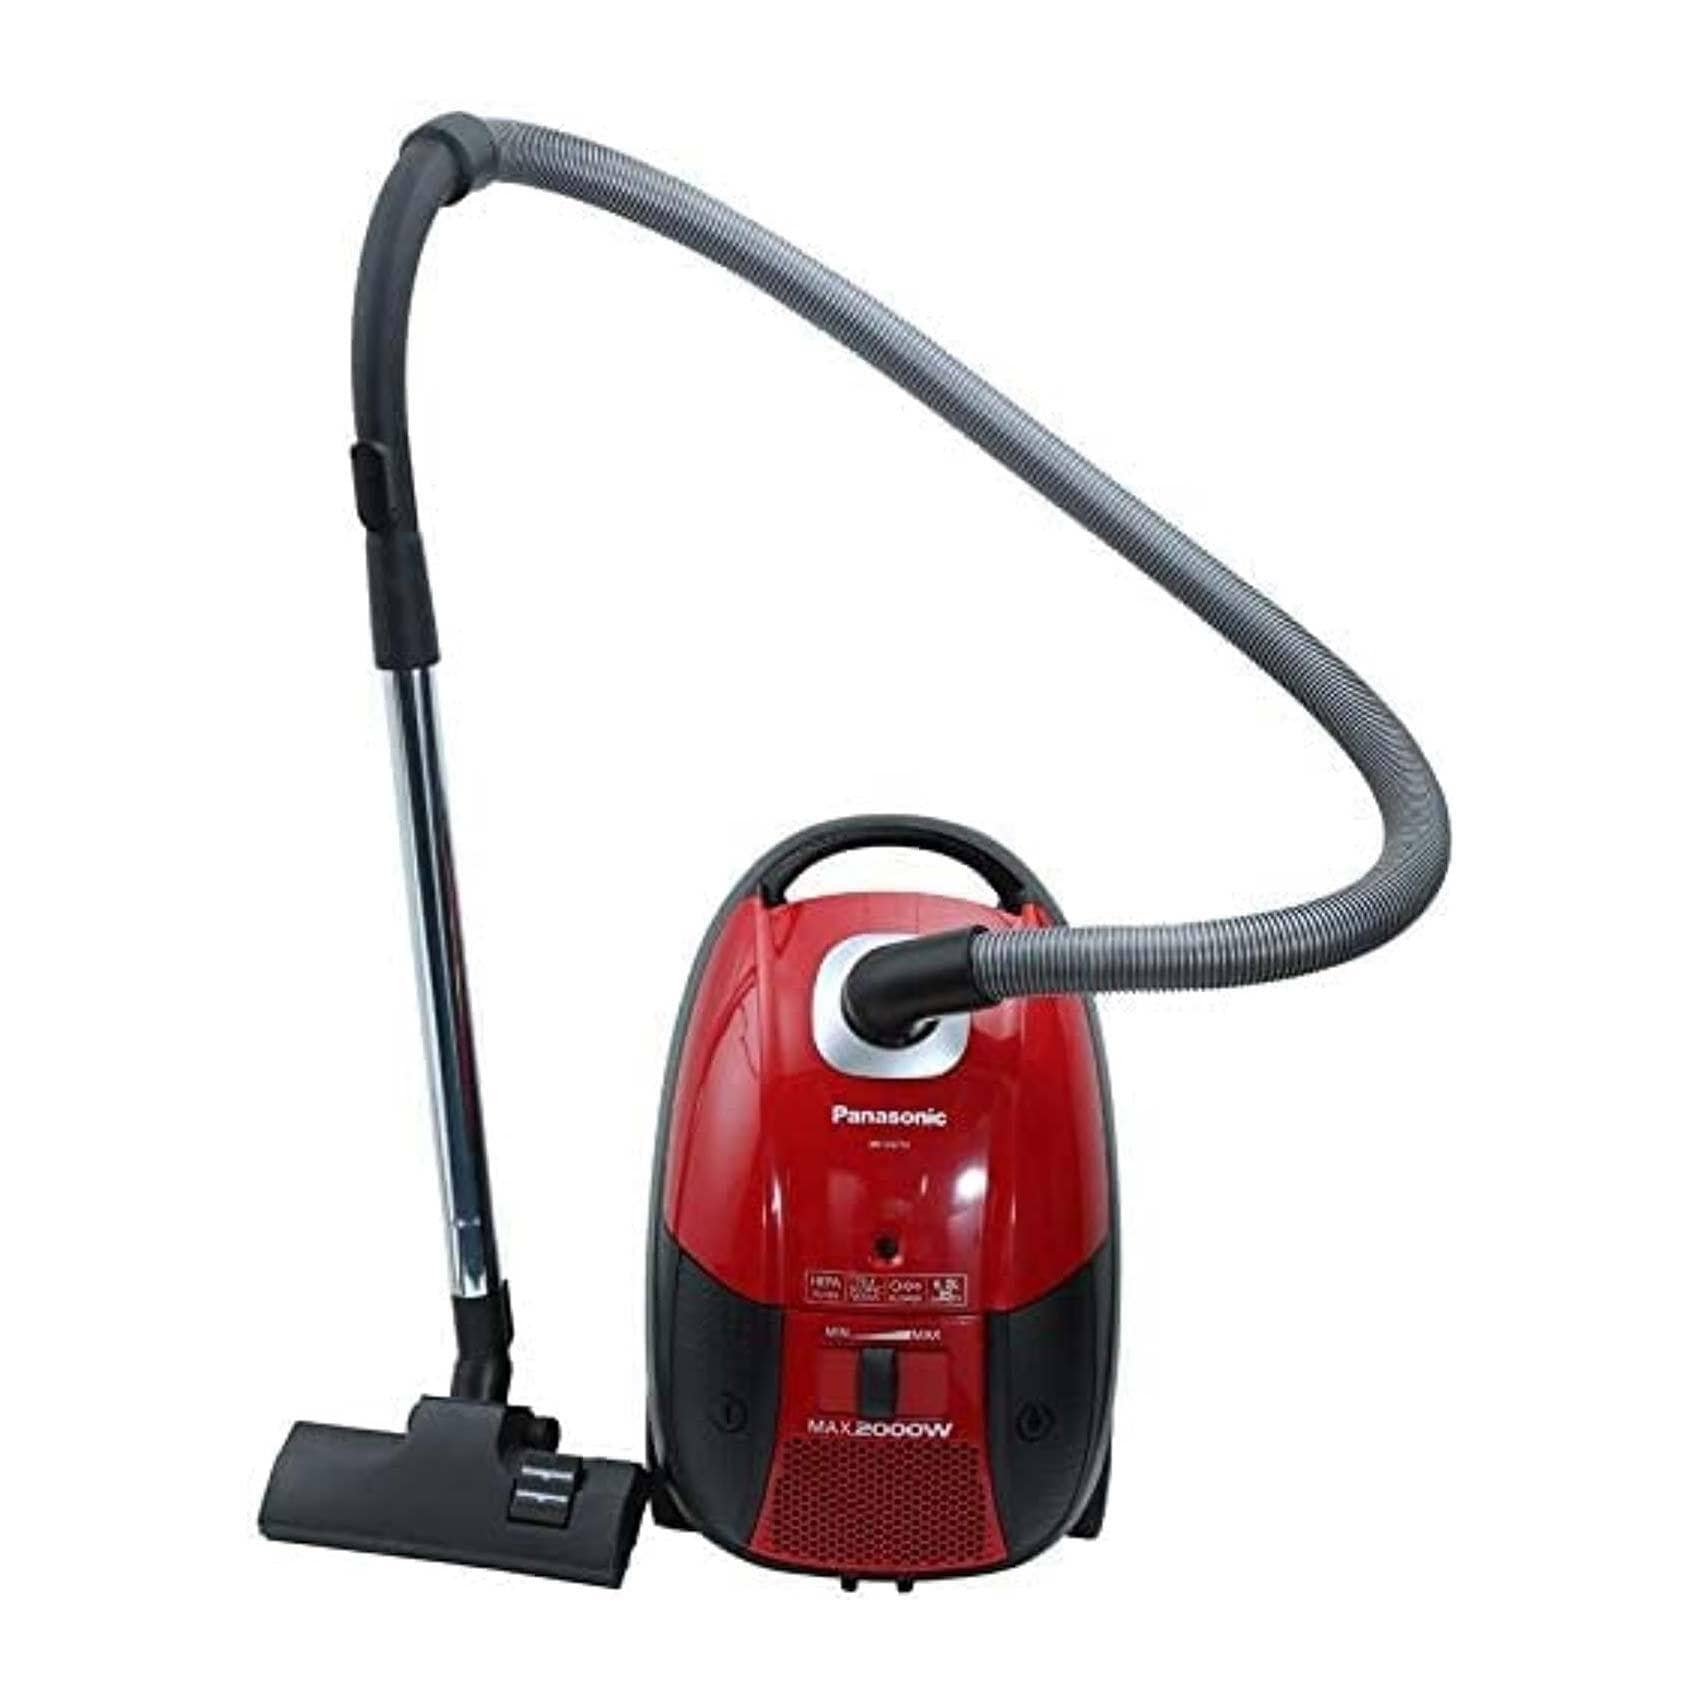 Hoover Athos TAT2520020 Vacuum Cleaner: Buy Online at Best Price in Egypt -  Souq is now